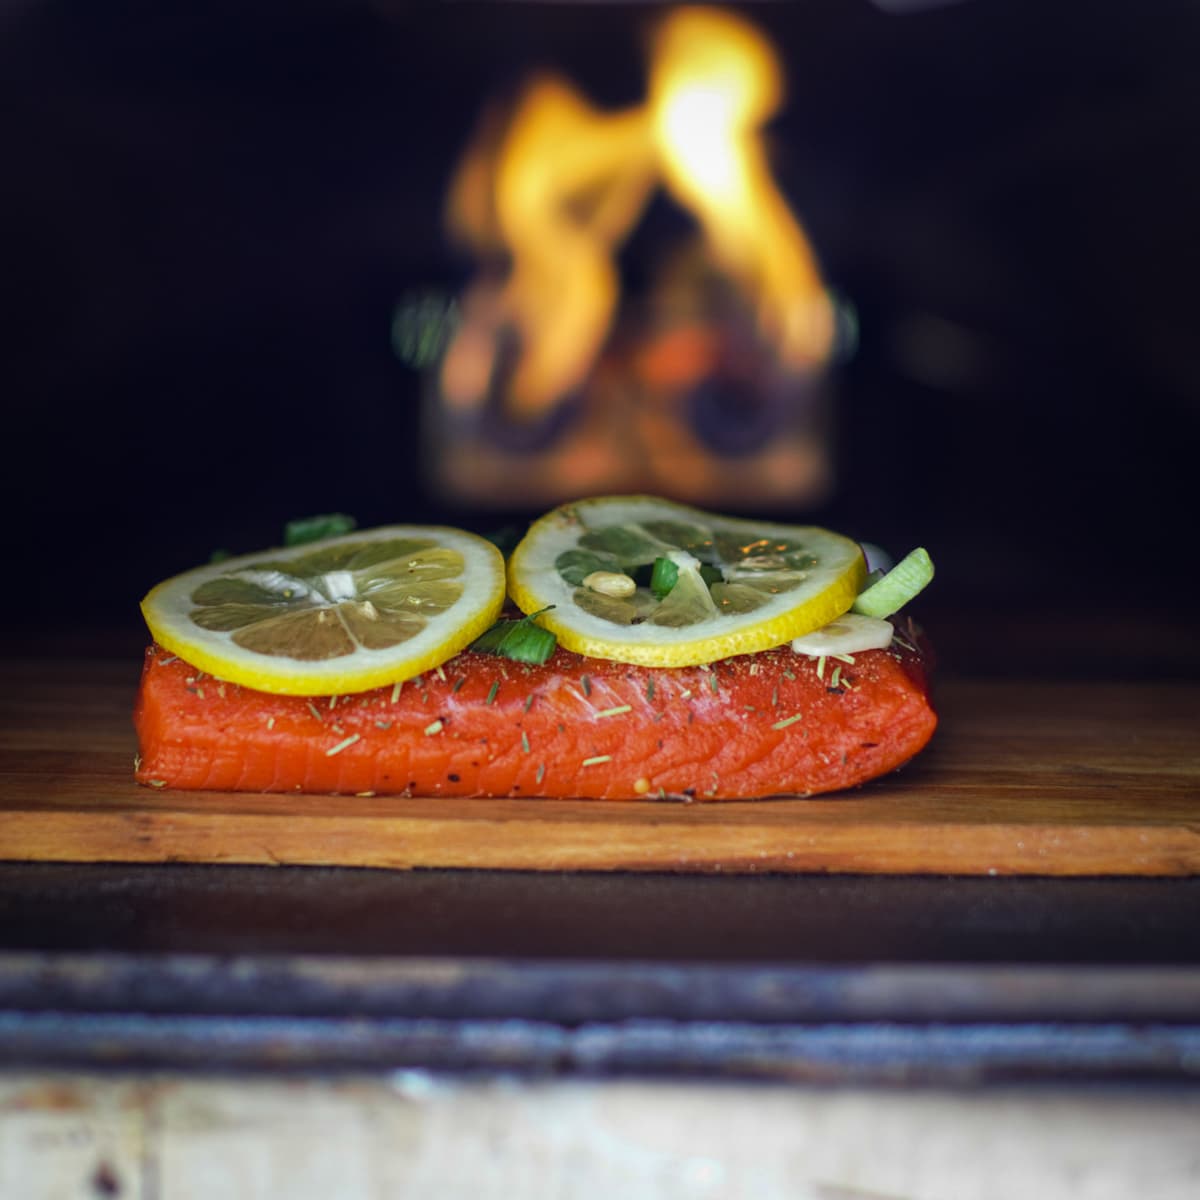 Wood plank salmon in a wood fire pizza oven.